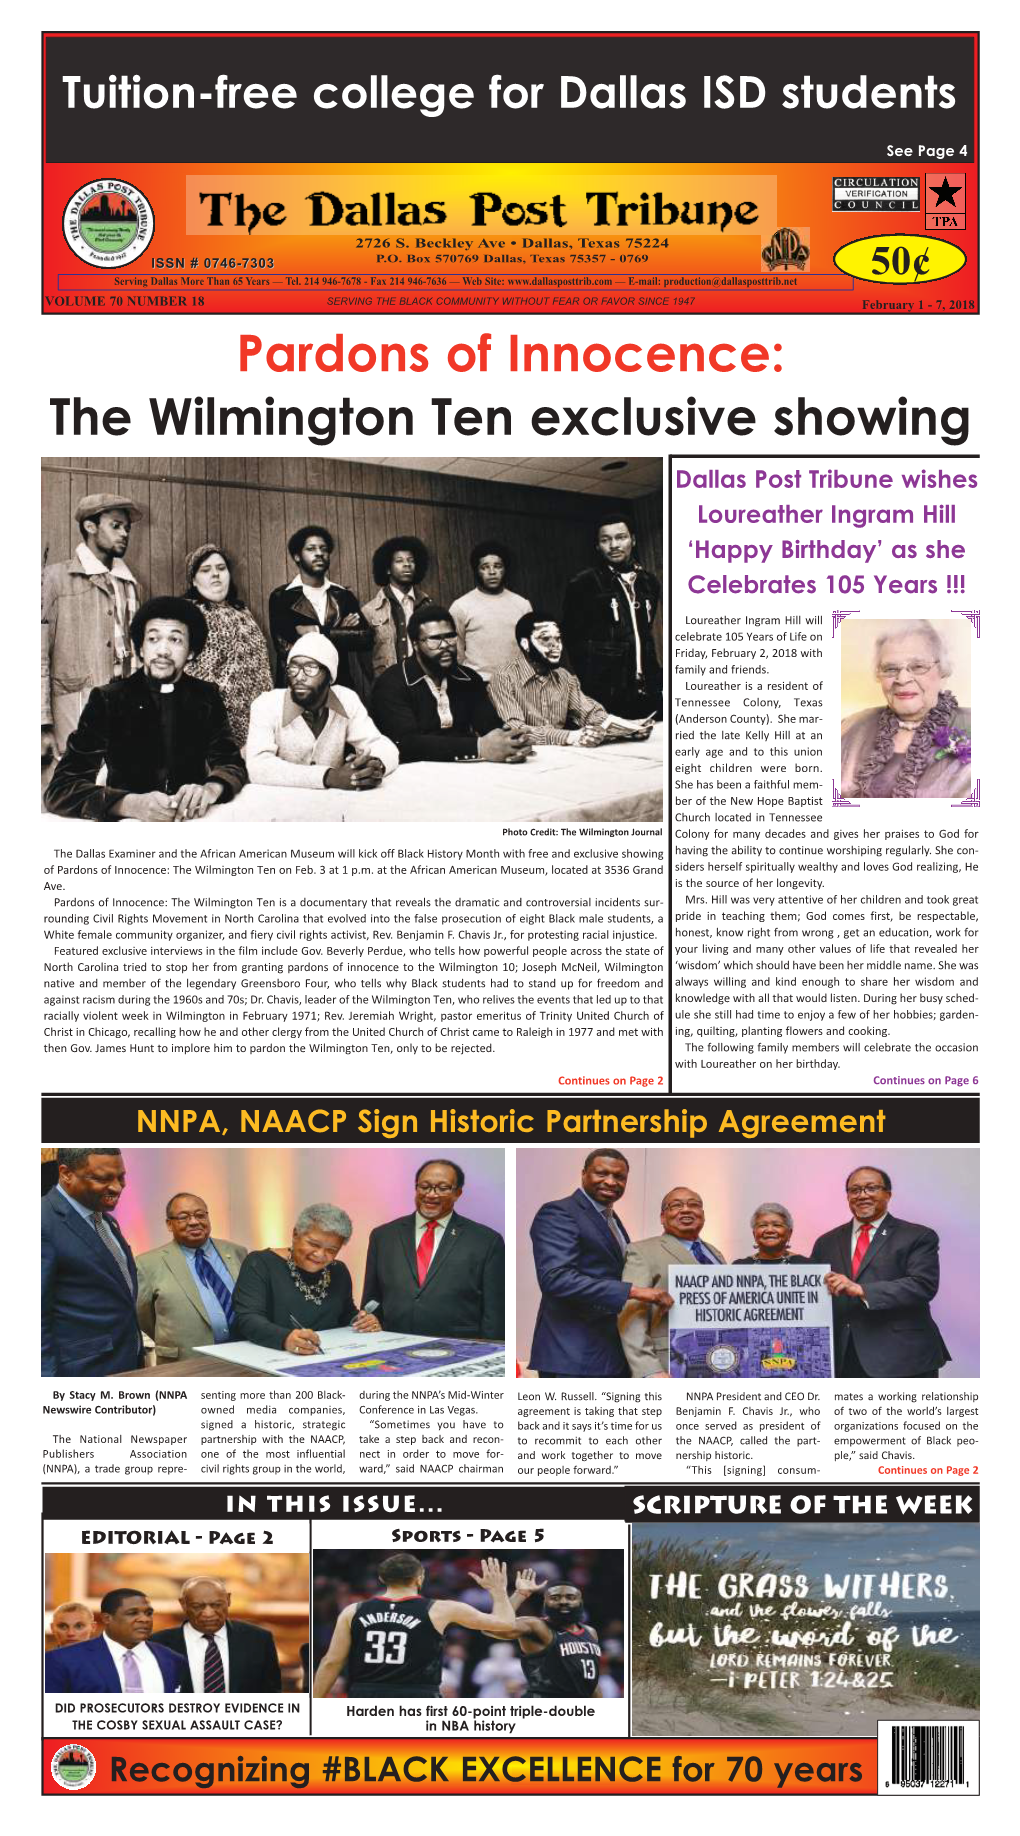 Pardons of Innocence: the Wilmington Ten Exclusive Showing Dallas Post Tribune Wishes Loureather Ingram Hill ‘Happy Birthday’ As She Celebrates 105 Years !!!